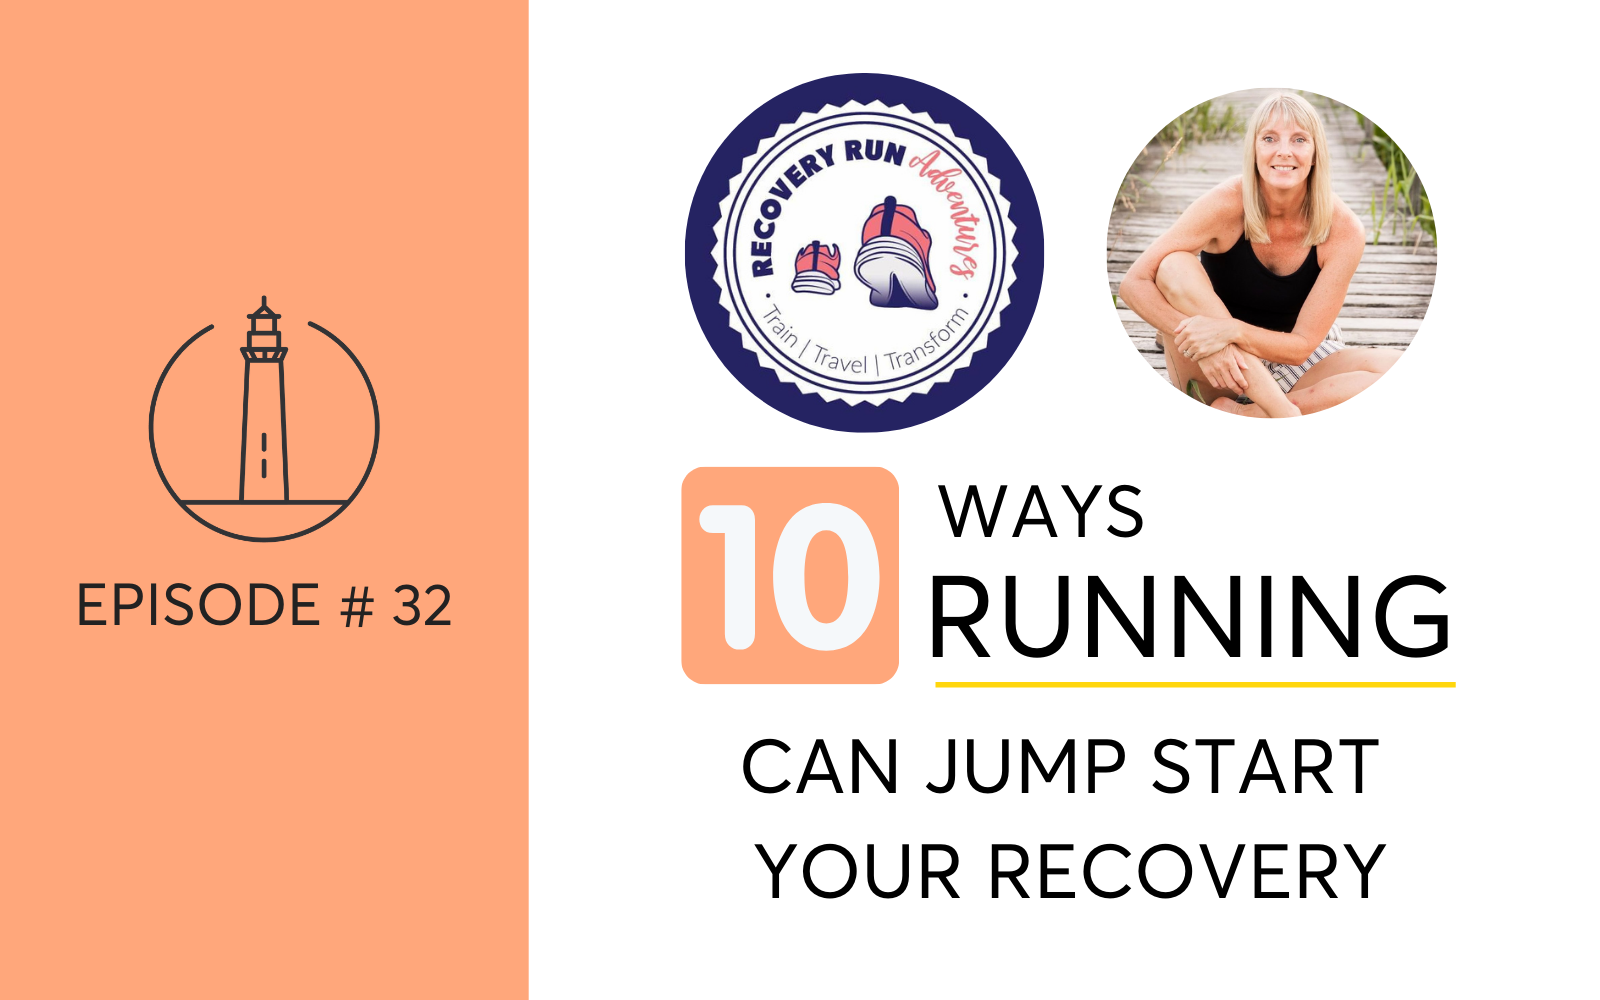 10 Ways Running Can Jumpstart Recovery For Women Quitting Drinking